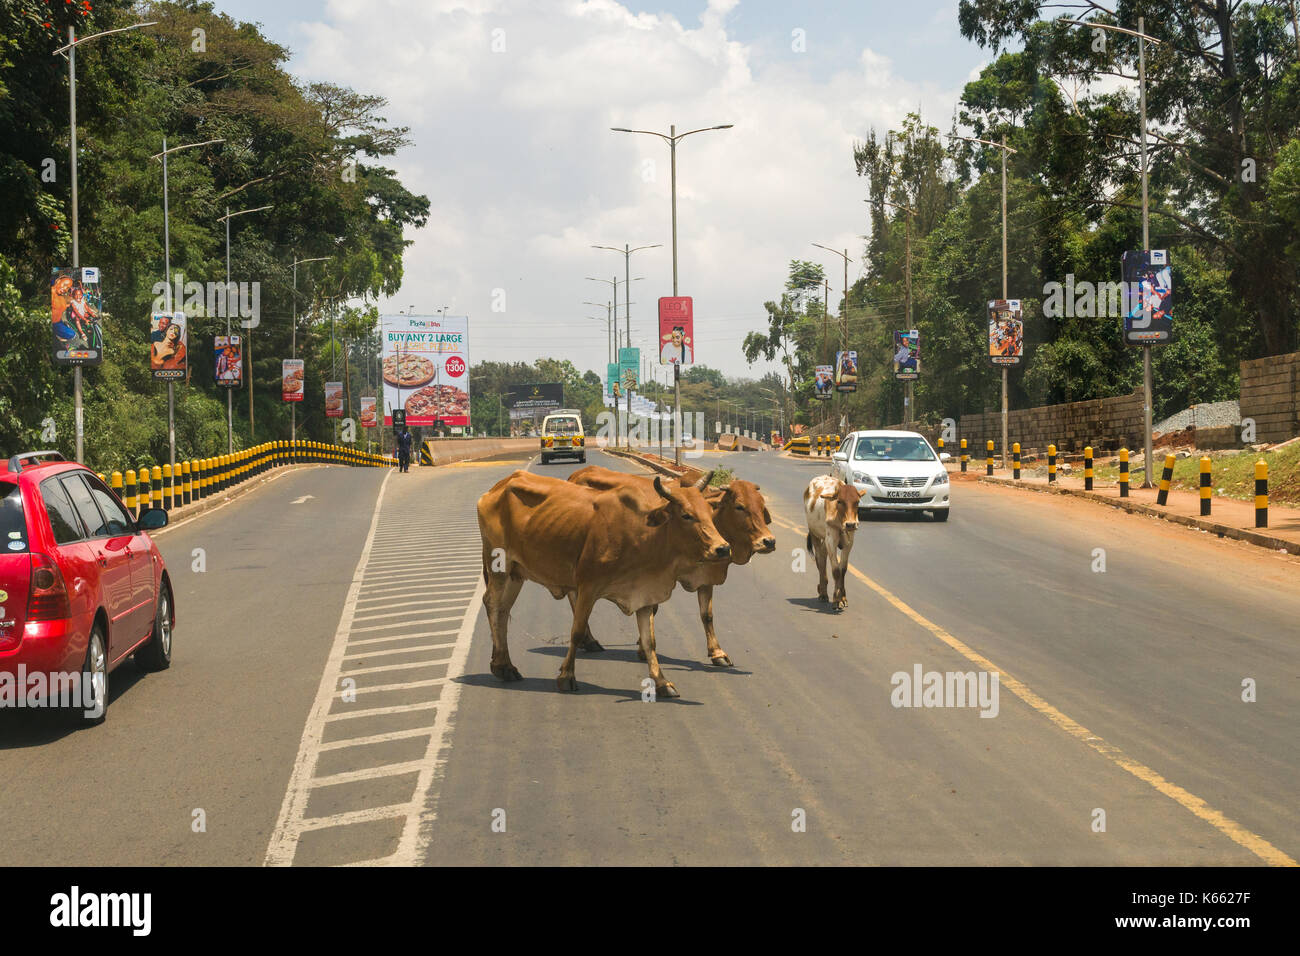 Small herd of cows crossing main road with traffic stopped waiting, Kenya Stock Photo